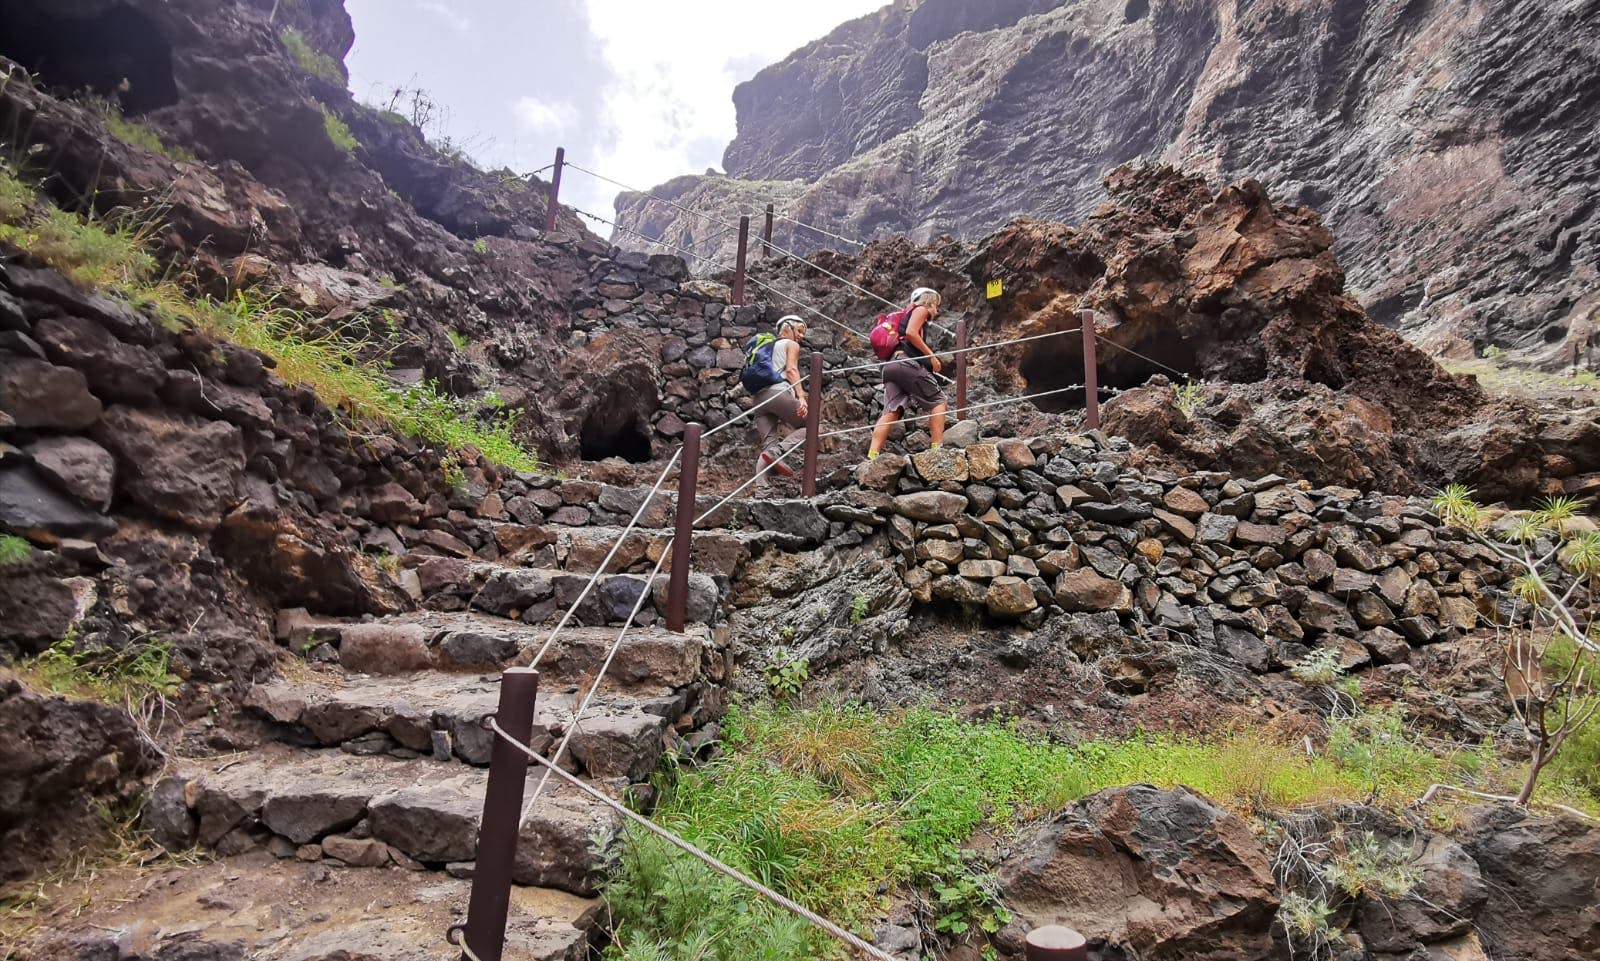 Hiking on secured stairs and with helmets in the Barranco of Masca - Photo: Robert Große Bley